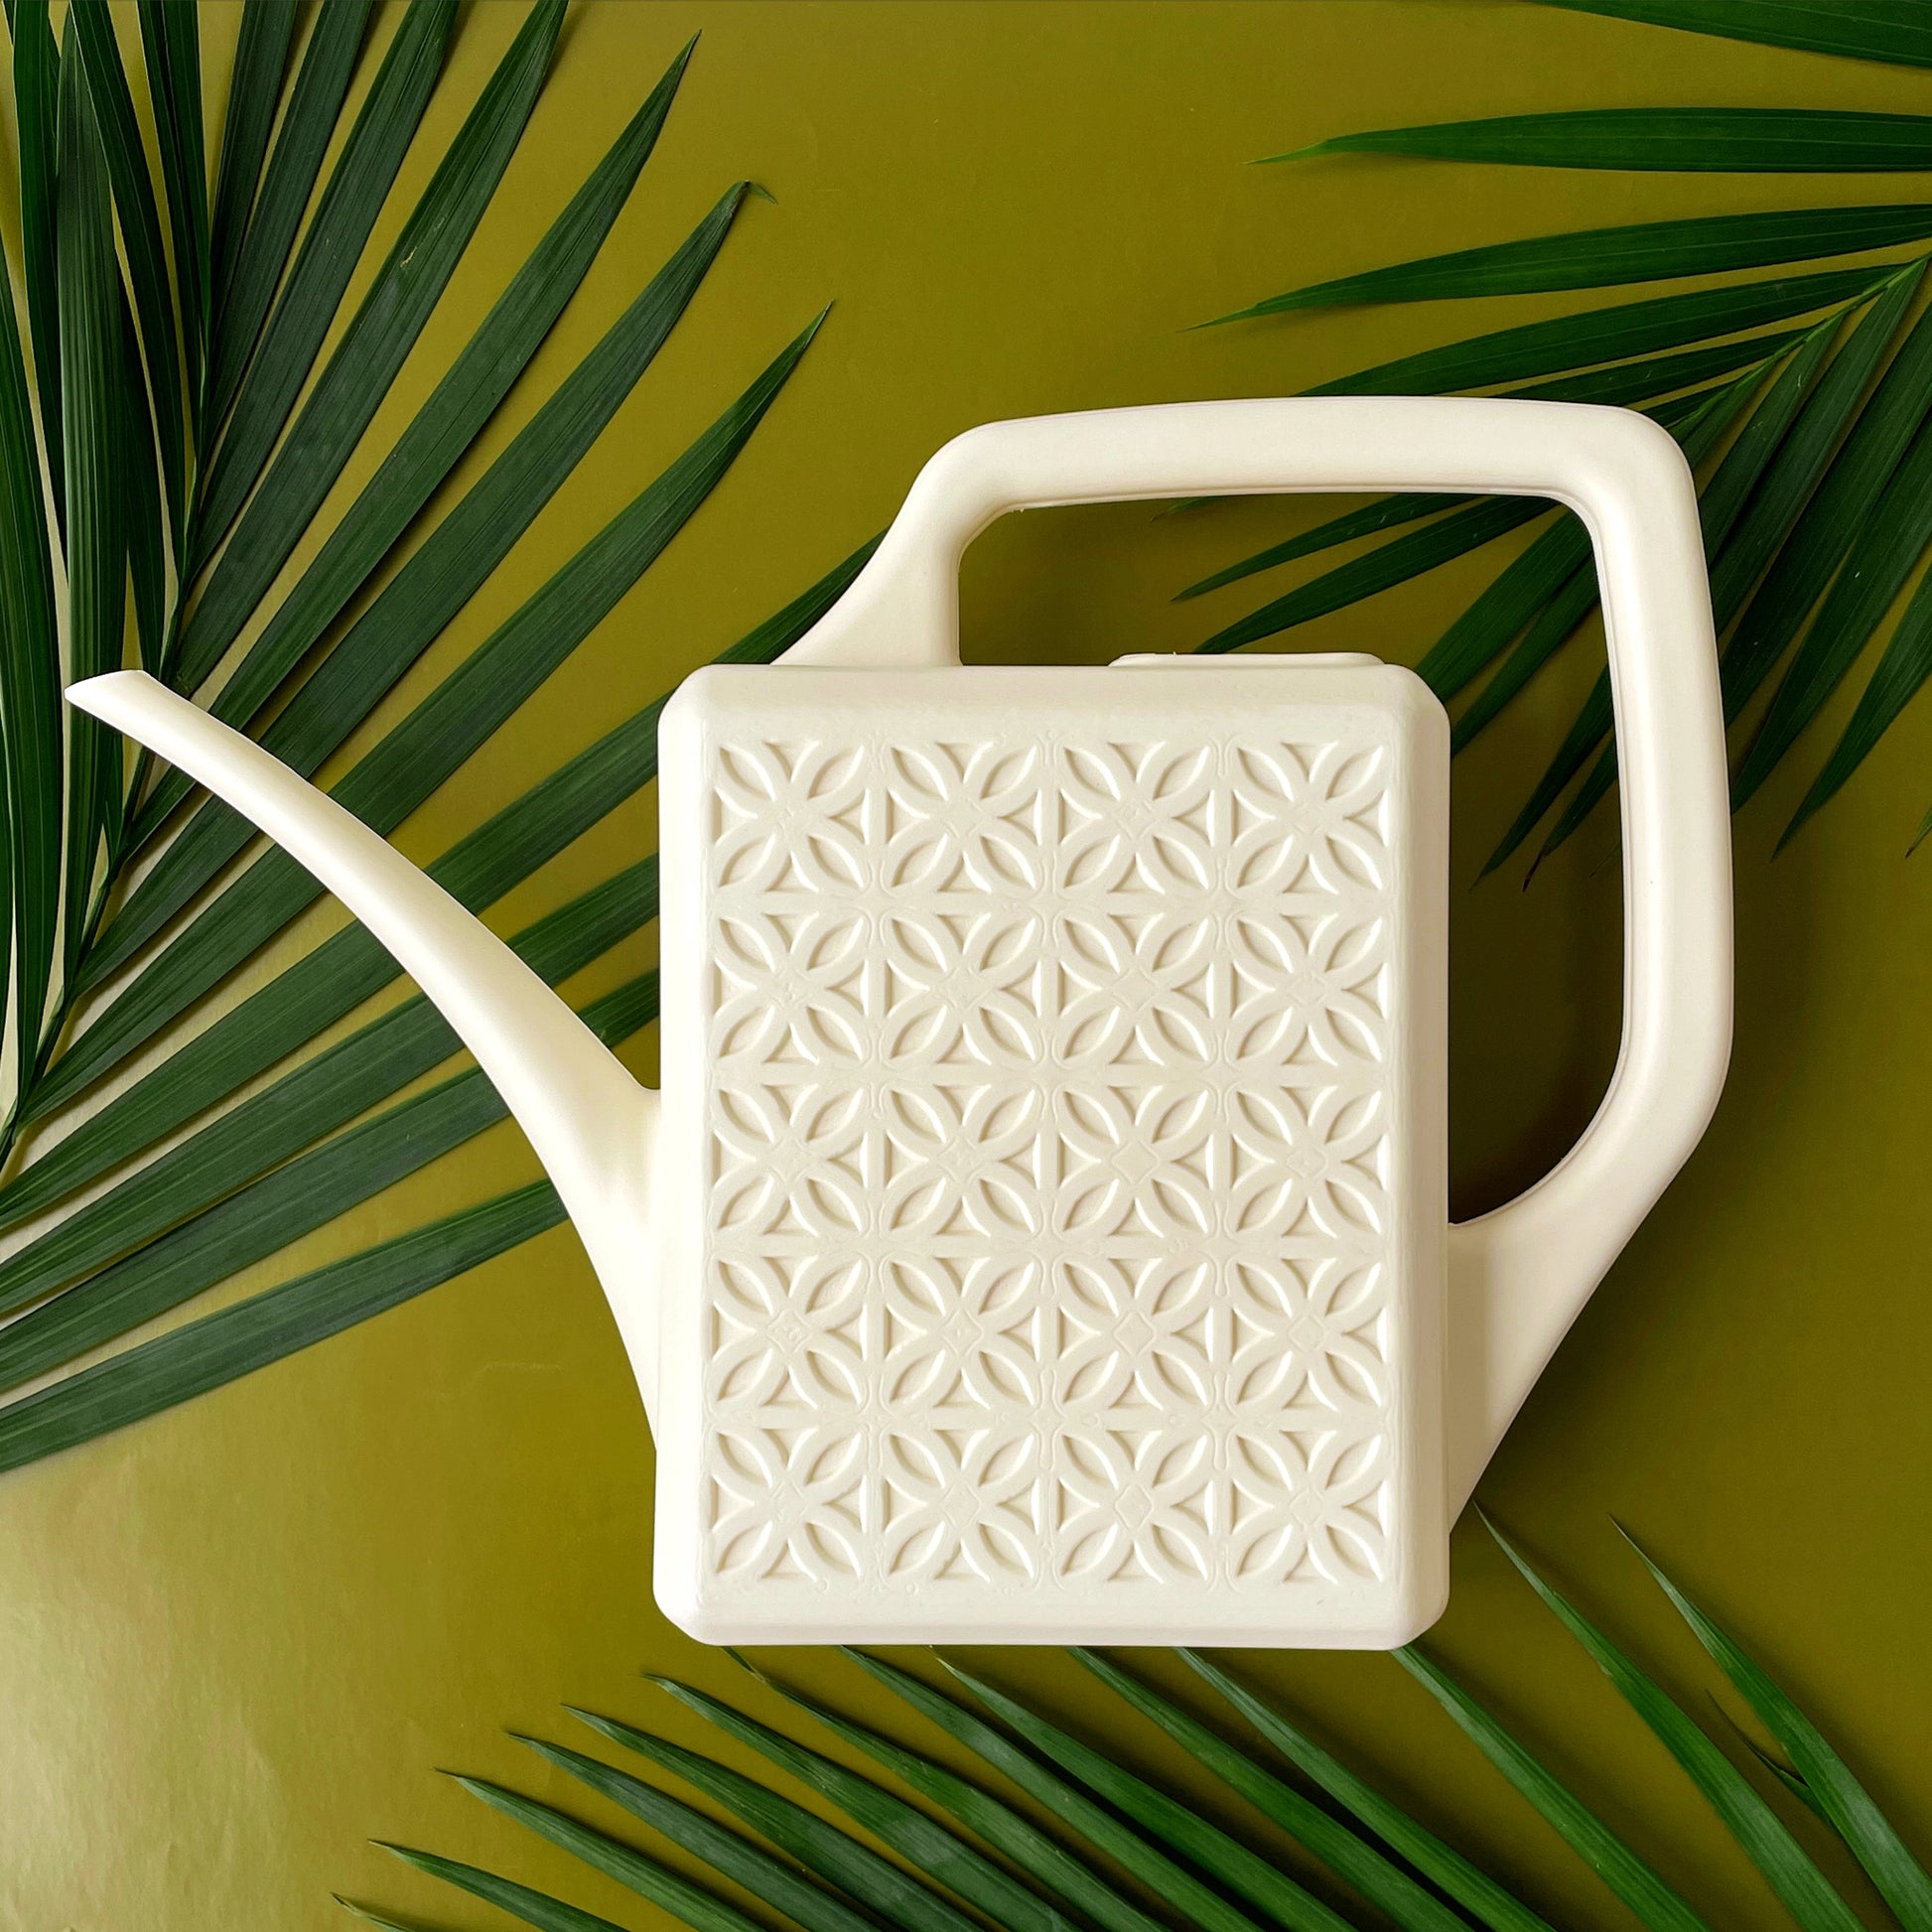 An ivory plastic watering can with a narrow spout and square handle and a rectangle breeze block design on the sides. The watering can is photographed on a lime green ground with palm fronds spilling into the image.